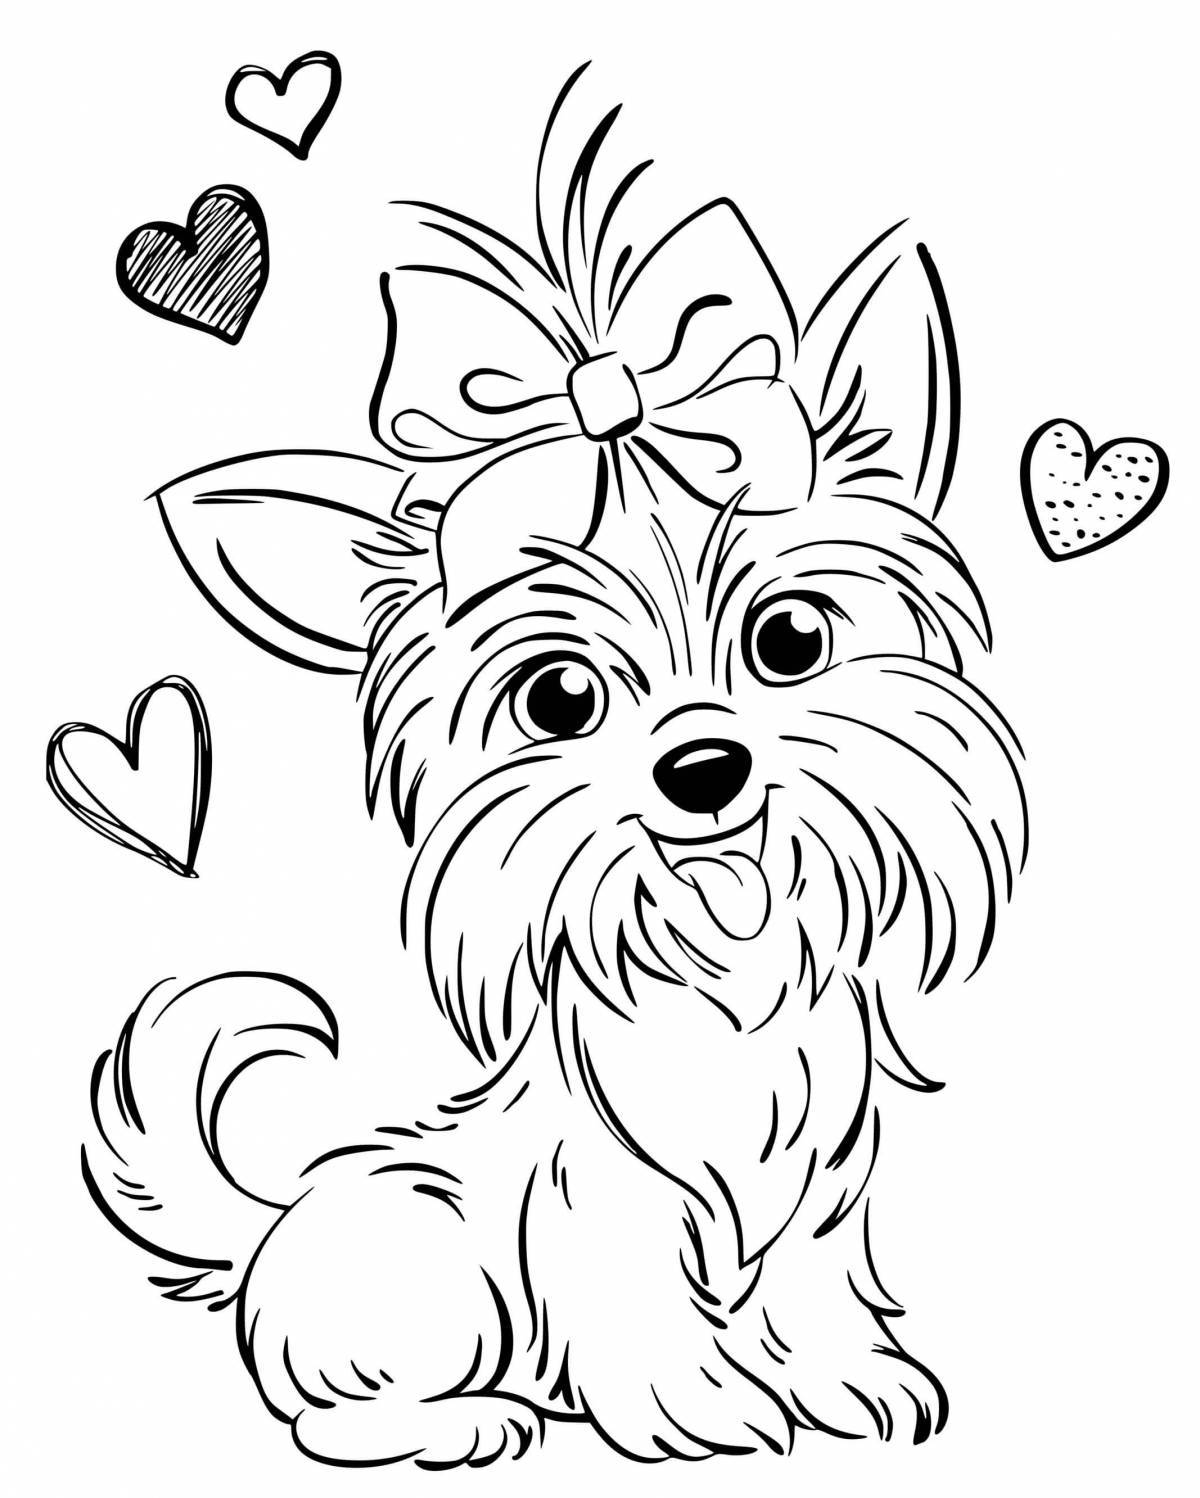 Intriguing Yorkshire Terrier coloring book